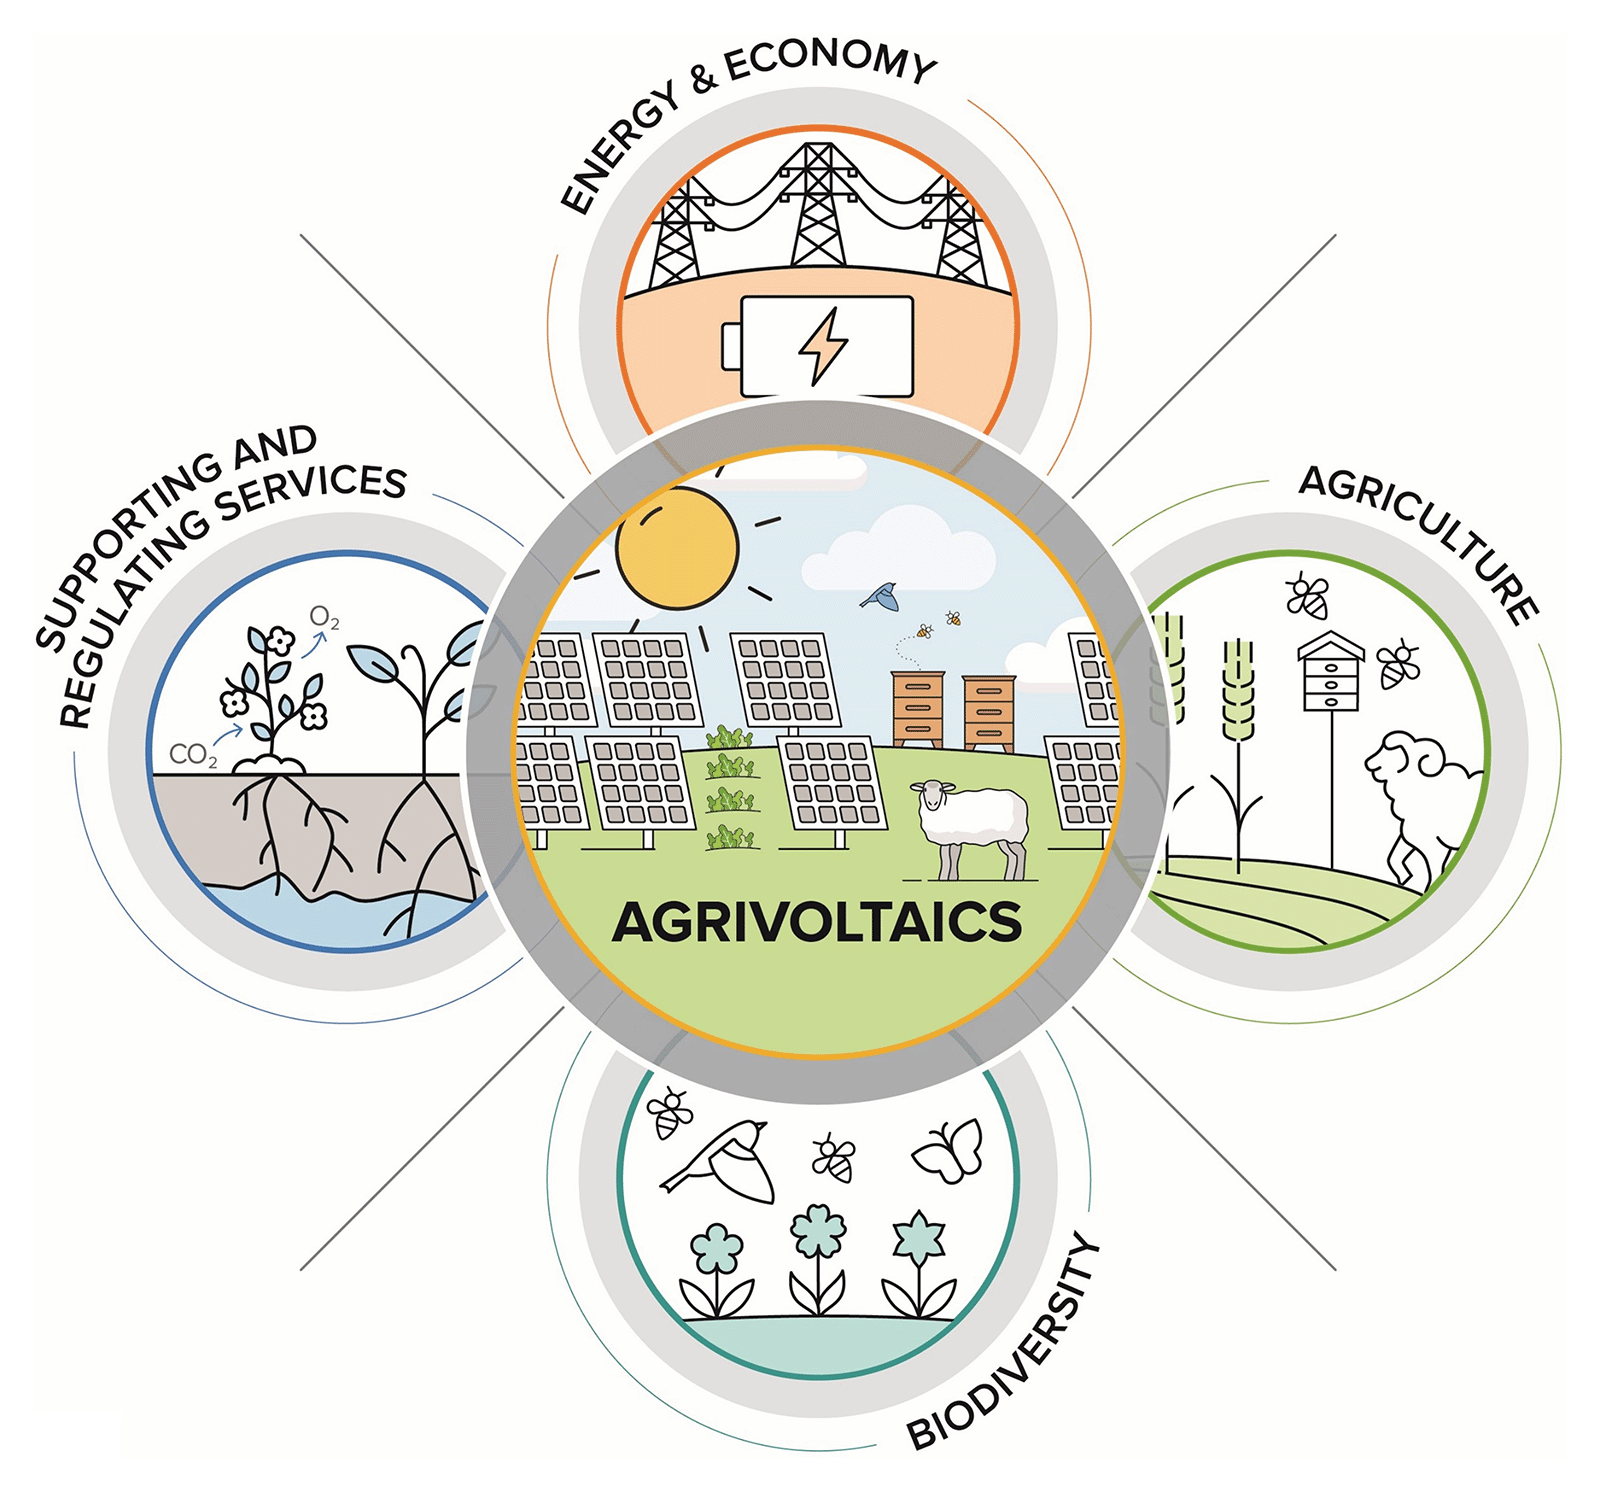 Conceptual illustration of the potential ecosystem services of agrivoltaic systems, including energy and food production, biodiversity conservation, and supporting and regulating services (such as runoff control and carbon sequestration).